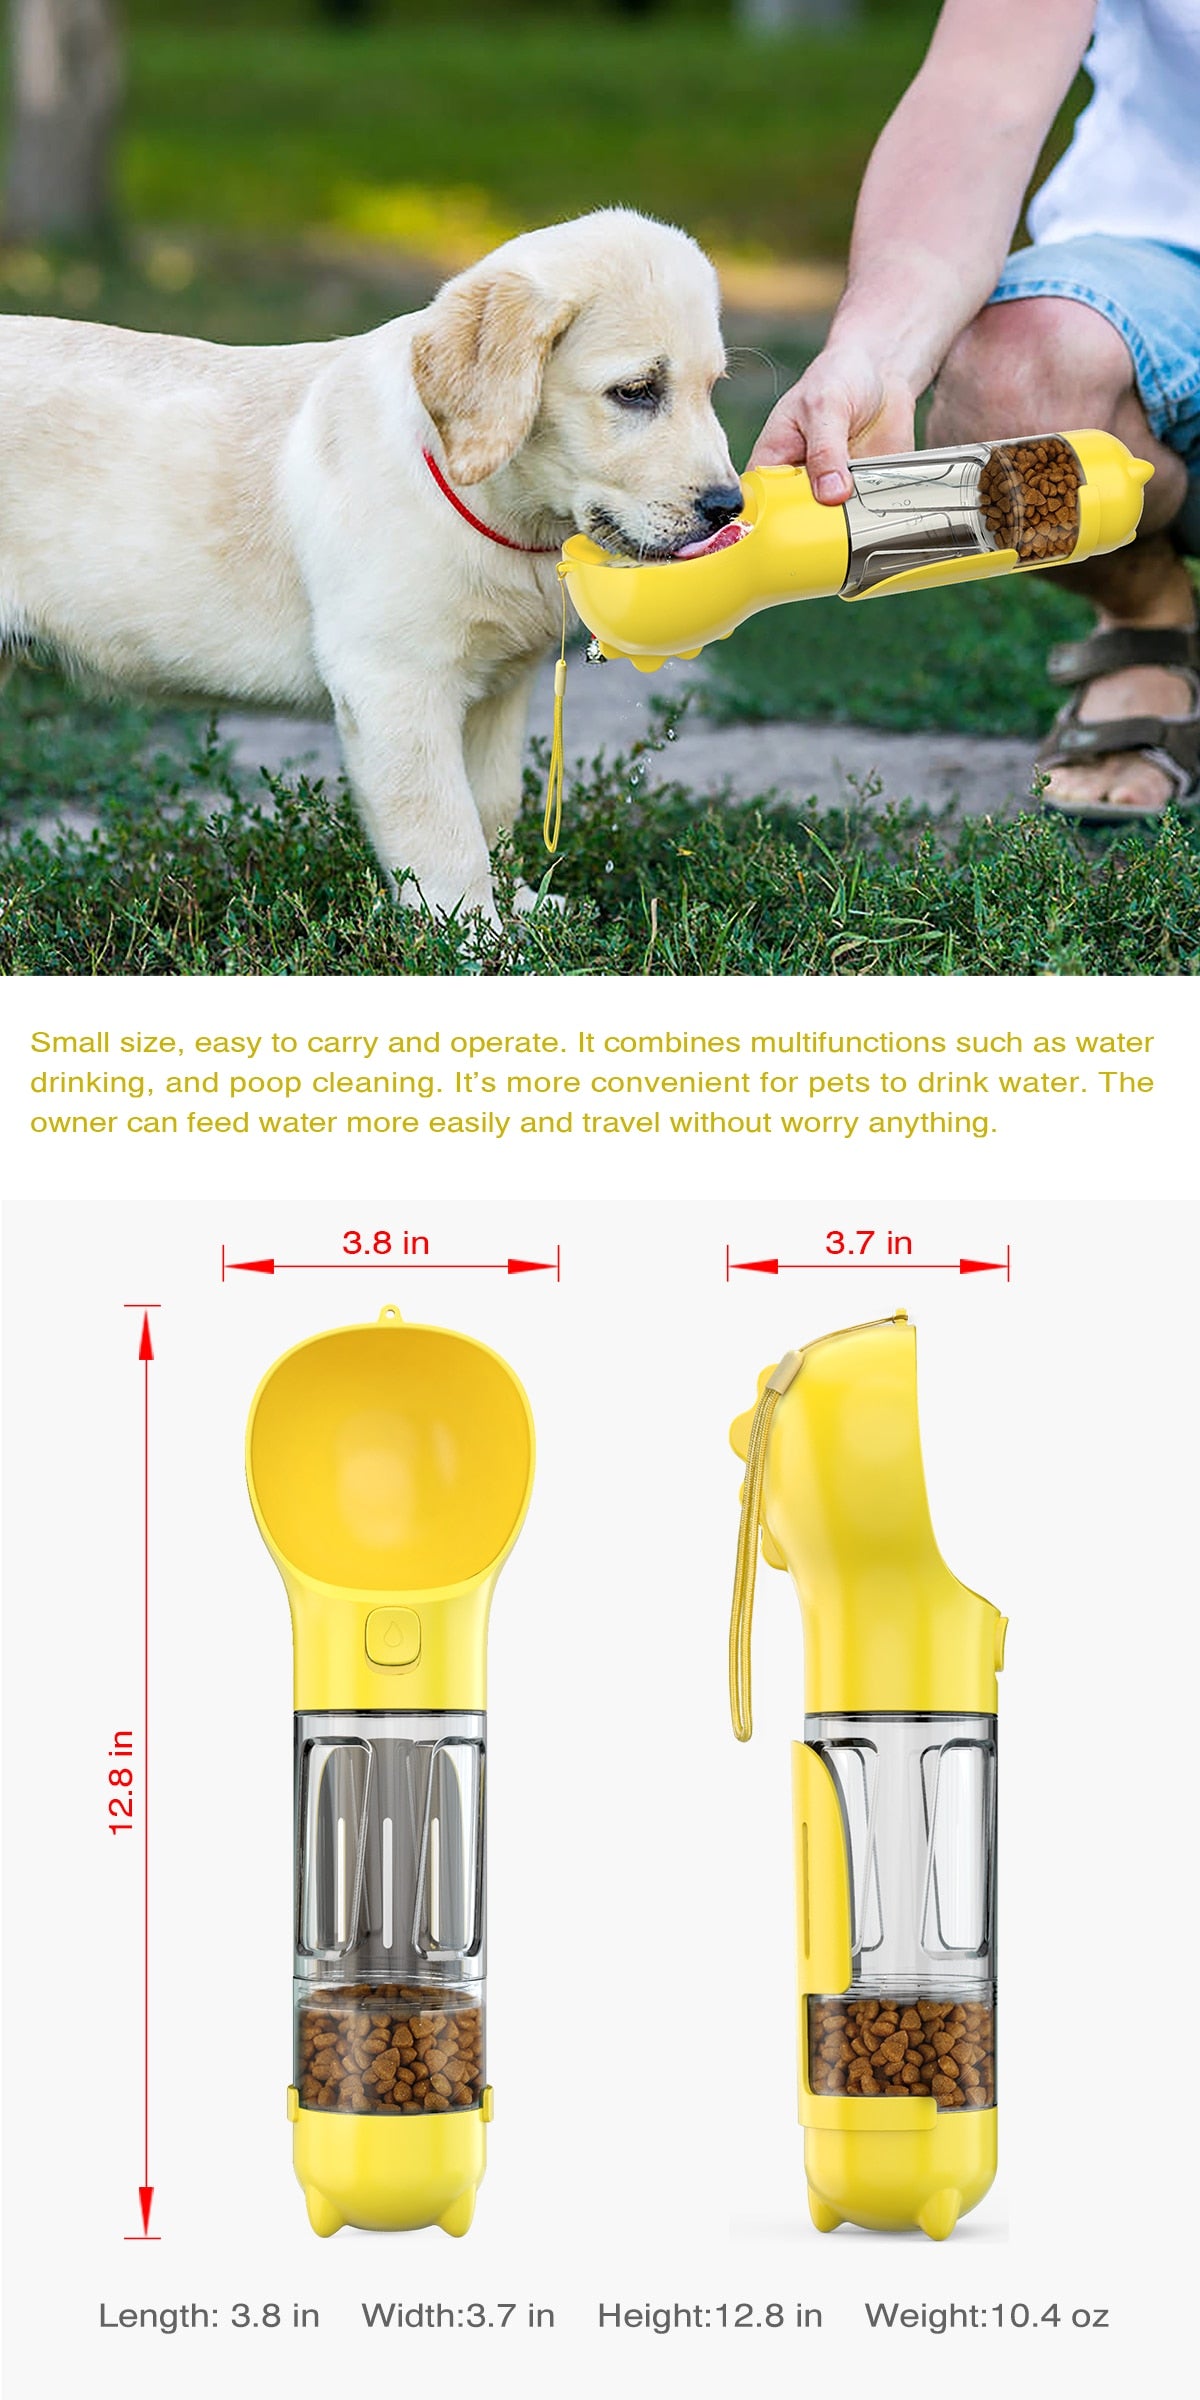 Dog Cat Portable Travel Water Cup Outdoor Feeder Feeding Cup Bottle For Pet Dog Cat Accessories Supplies DropShipping Gonius Pet - DreamWeaversStore